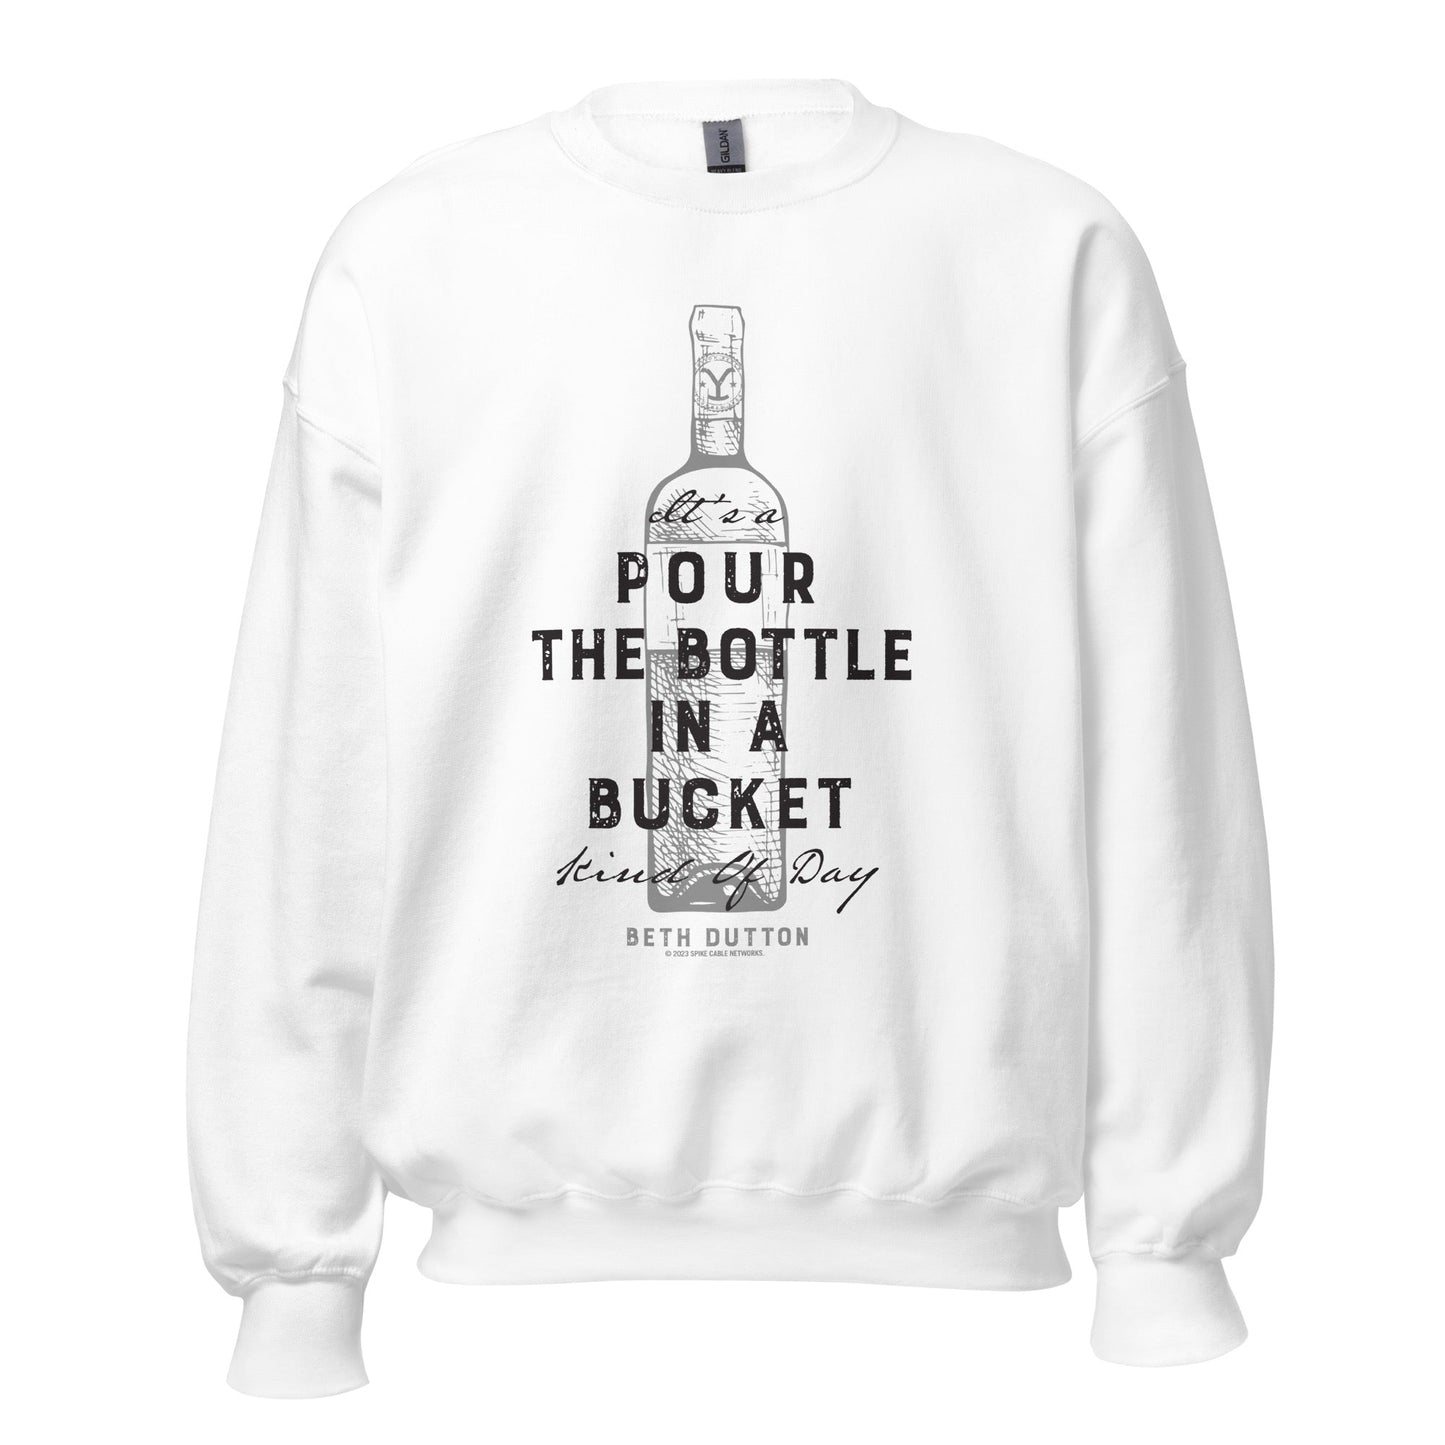 Yellowstone Pour The Bottle In The Bucket Crewneck Sweatshirt - Paramount Shop